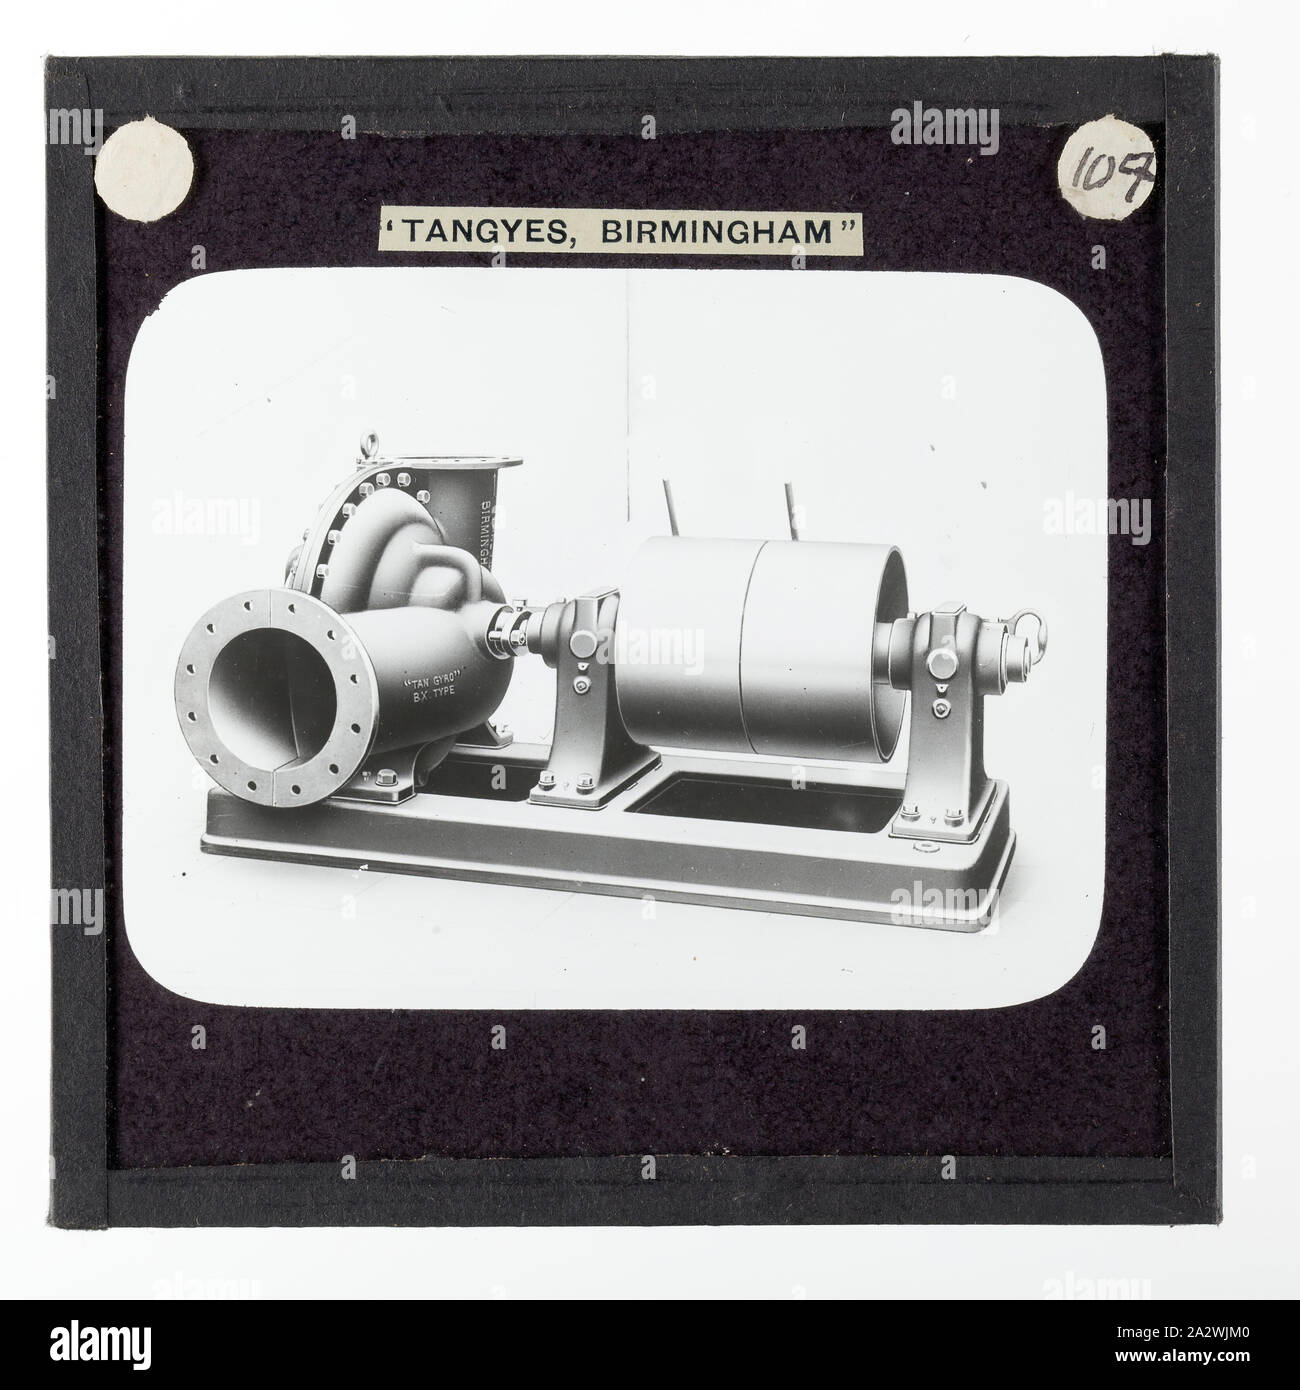 Lantern Slide - Tangyes Ltd, BX Type Centrifugal Pump, circa 1910, One of  239 glass lantern slides depicting products manufactured by Tangyes Limited  engineers of Birmingham, England. The images include various products